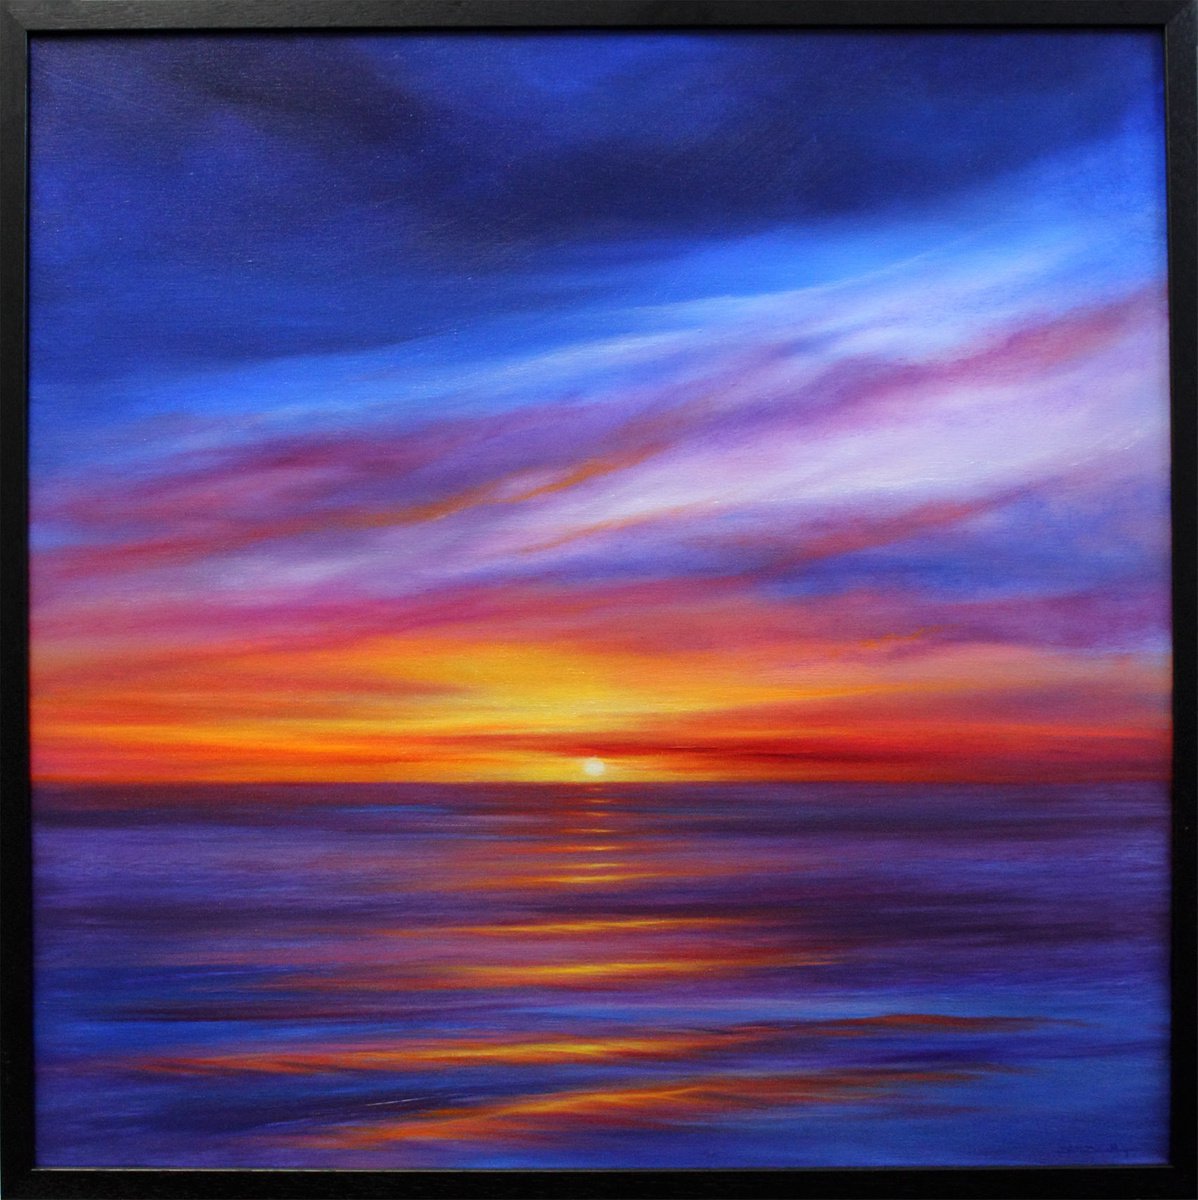 Sunset Reverie III by Stella Dunkley